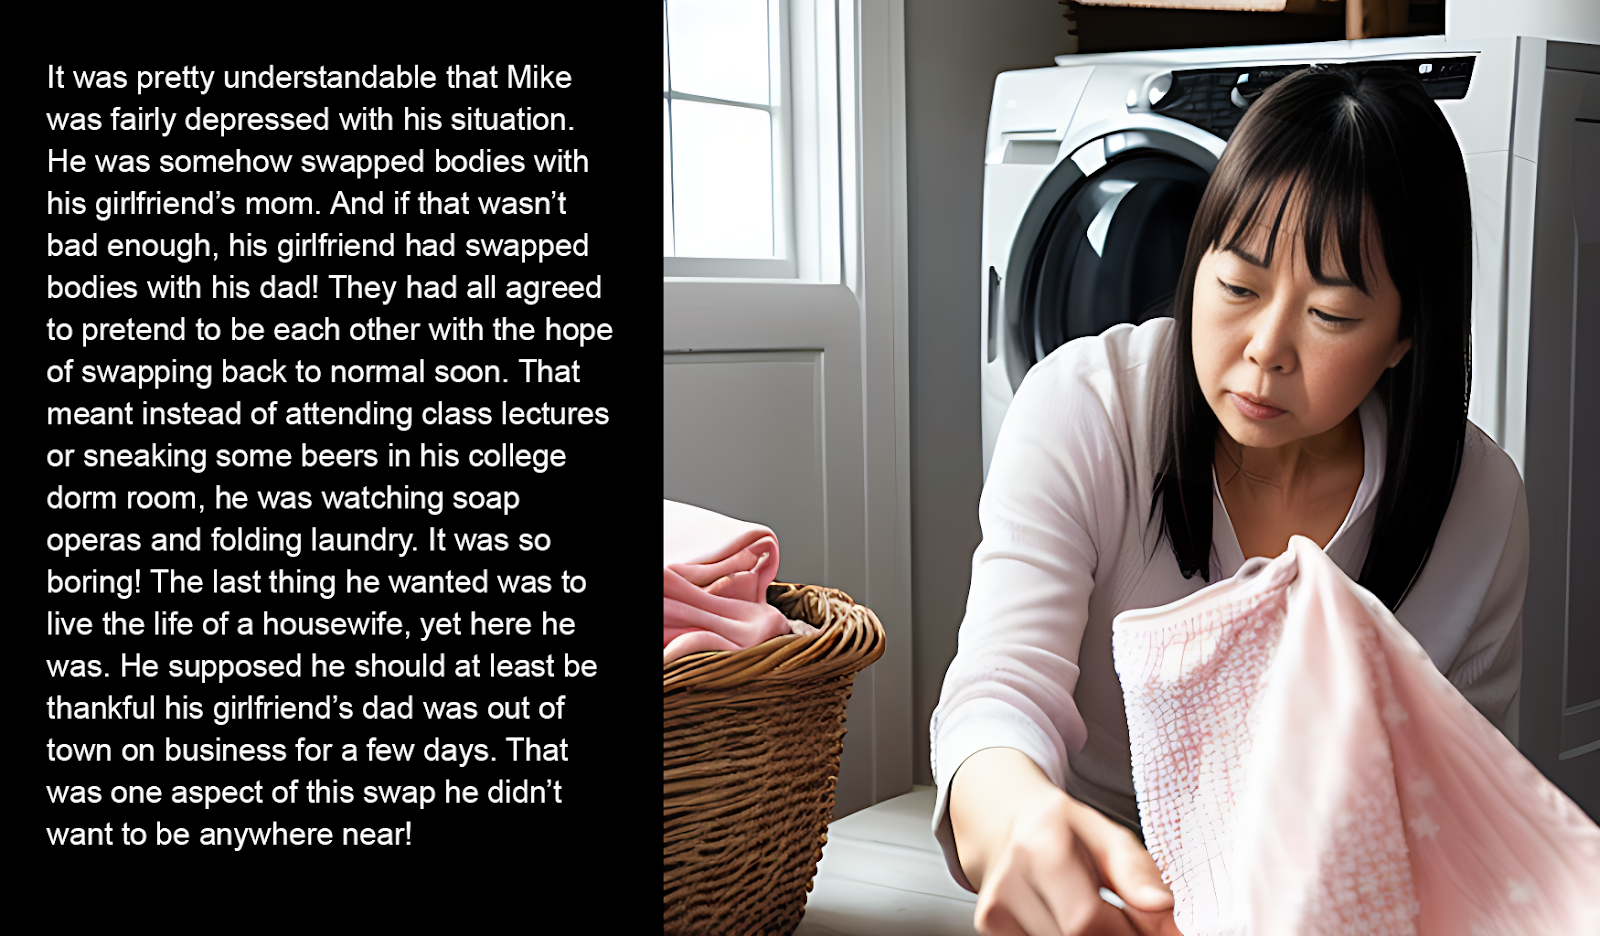 It was pretty understandable that Mike was fairly depressed with his situation. He was somehow swapped bodies with his girlfriend’s mom. And if that wasn’t bad enough, his girlfriend had swapped bodies with his dad! They had all agreed to pretend to be each other with the hope of swapping back to normal soon. That meant instead of attending class lectures or sneaking some beers in his college dorm room, he was watching soap operas and folding laundry. It was so boring! The last thing he wanted was to live the life of a housewife, yet here he was. He supposed he should at least be thankful his girlfriend’s dad was out of town on business for a few days. That was one aspect of this swap he didn’t want to be anywhere near!